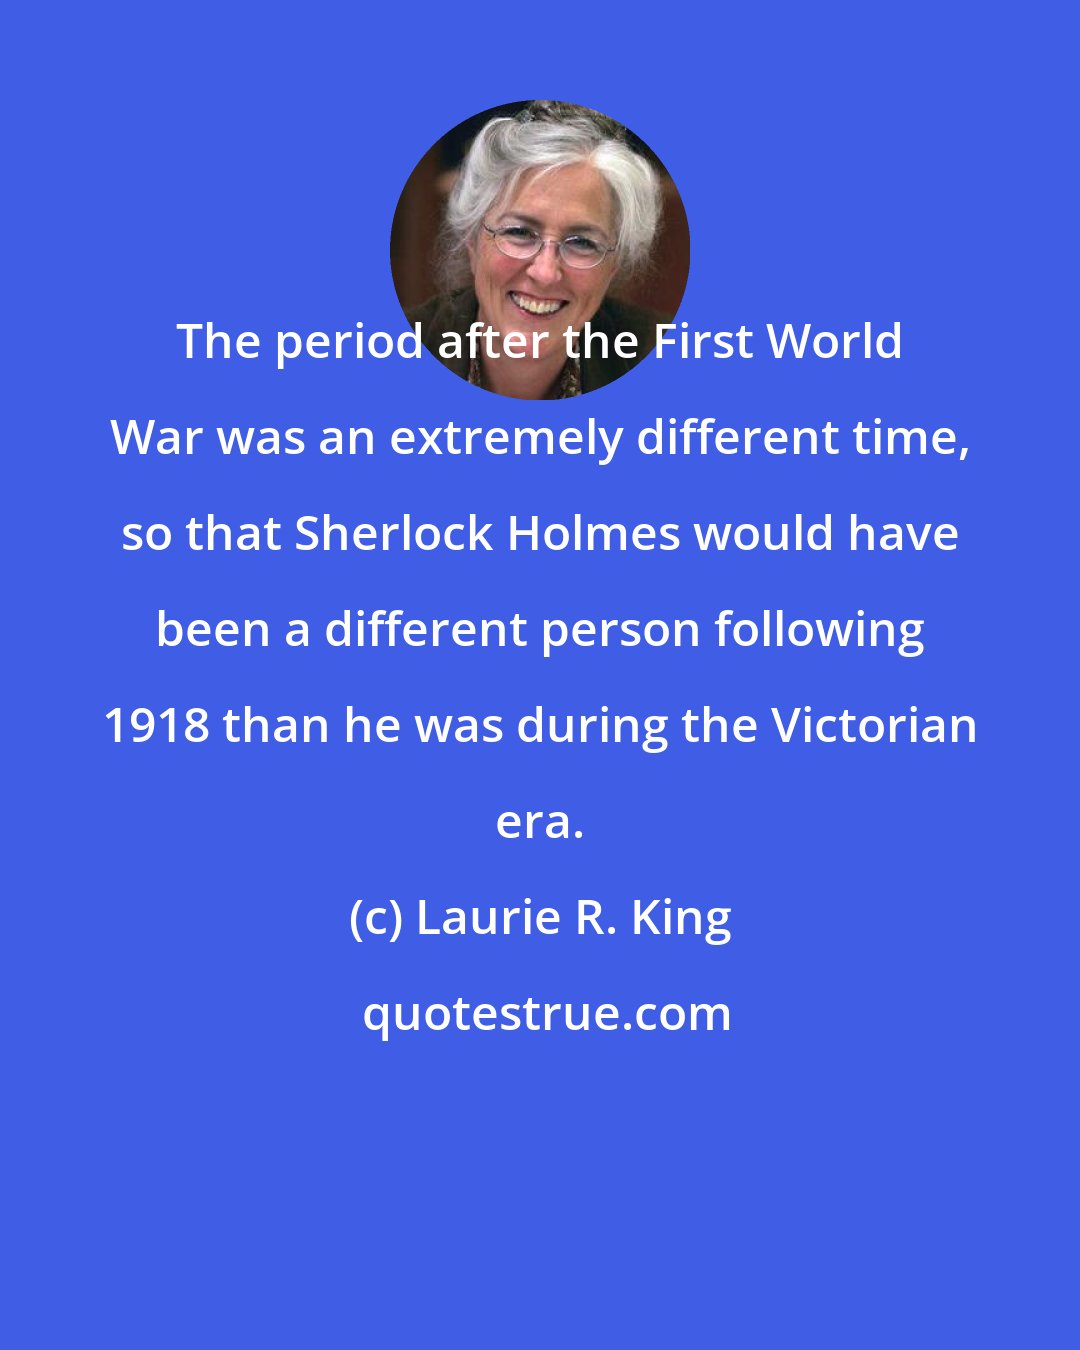 Laurie R. King: The period after the First World War was an extremely different time, so that Sherlock Holmes would have been a different person following 1918 than he was during the Victorian era.